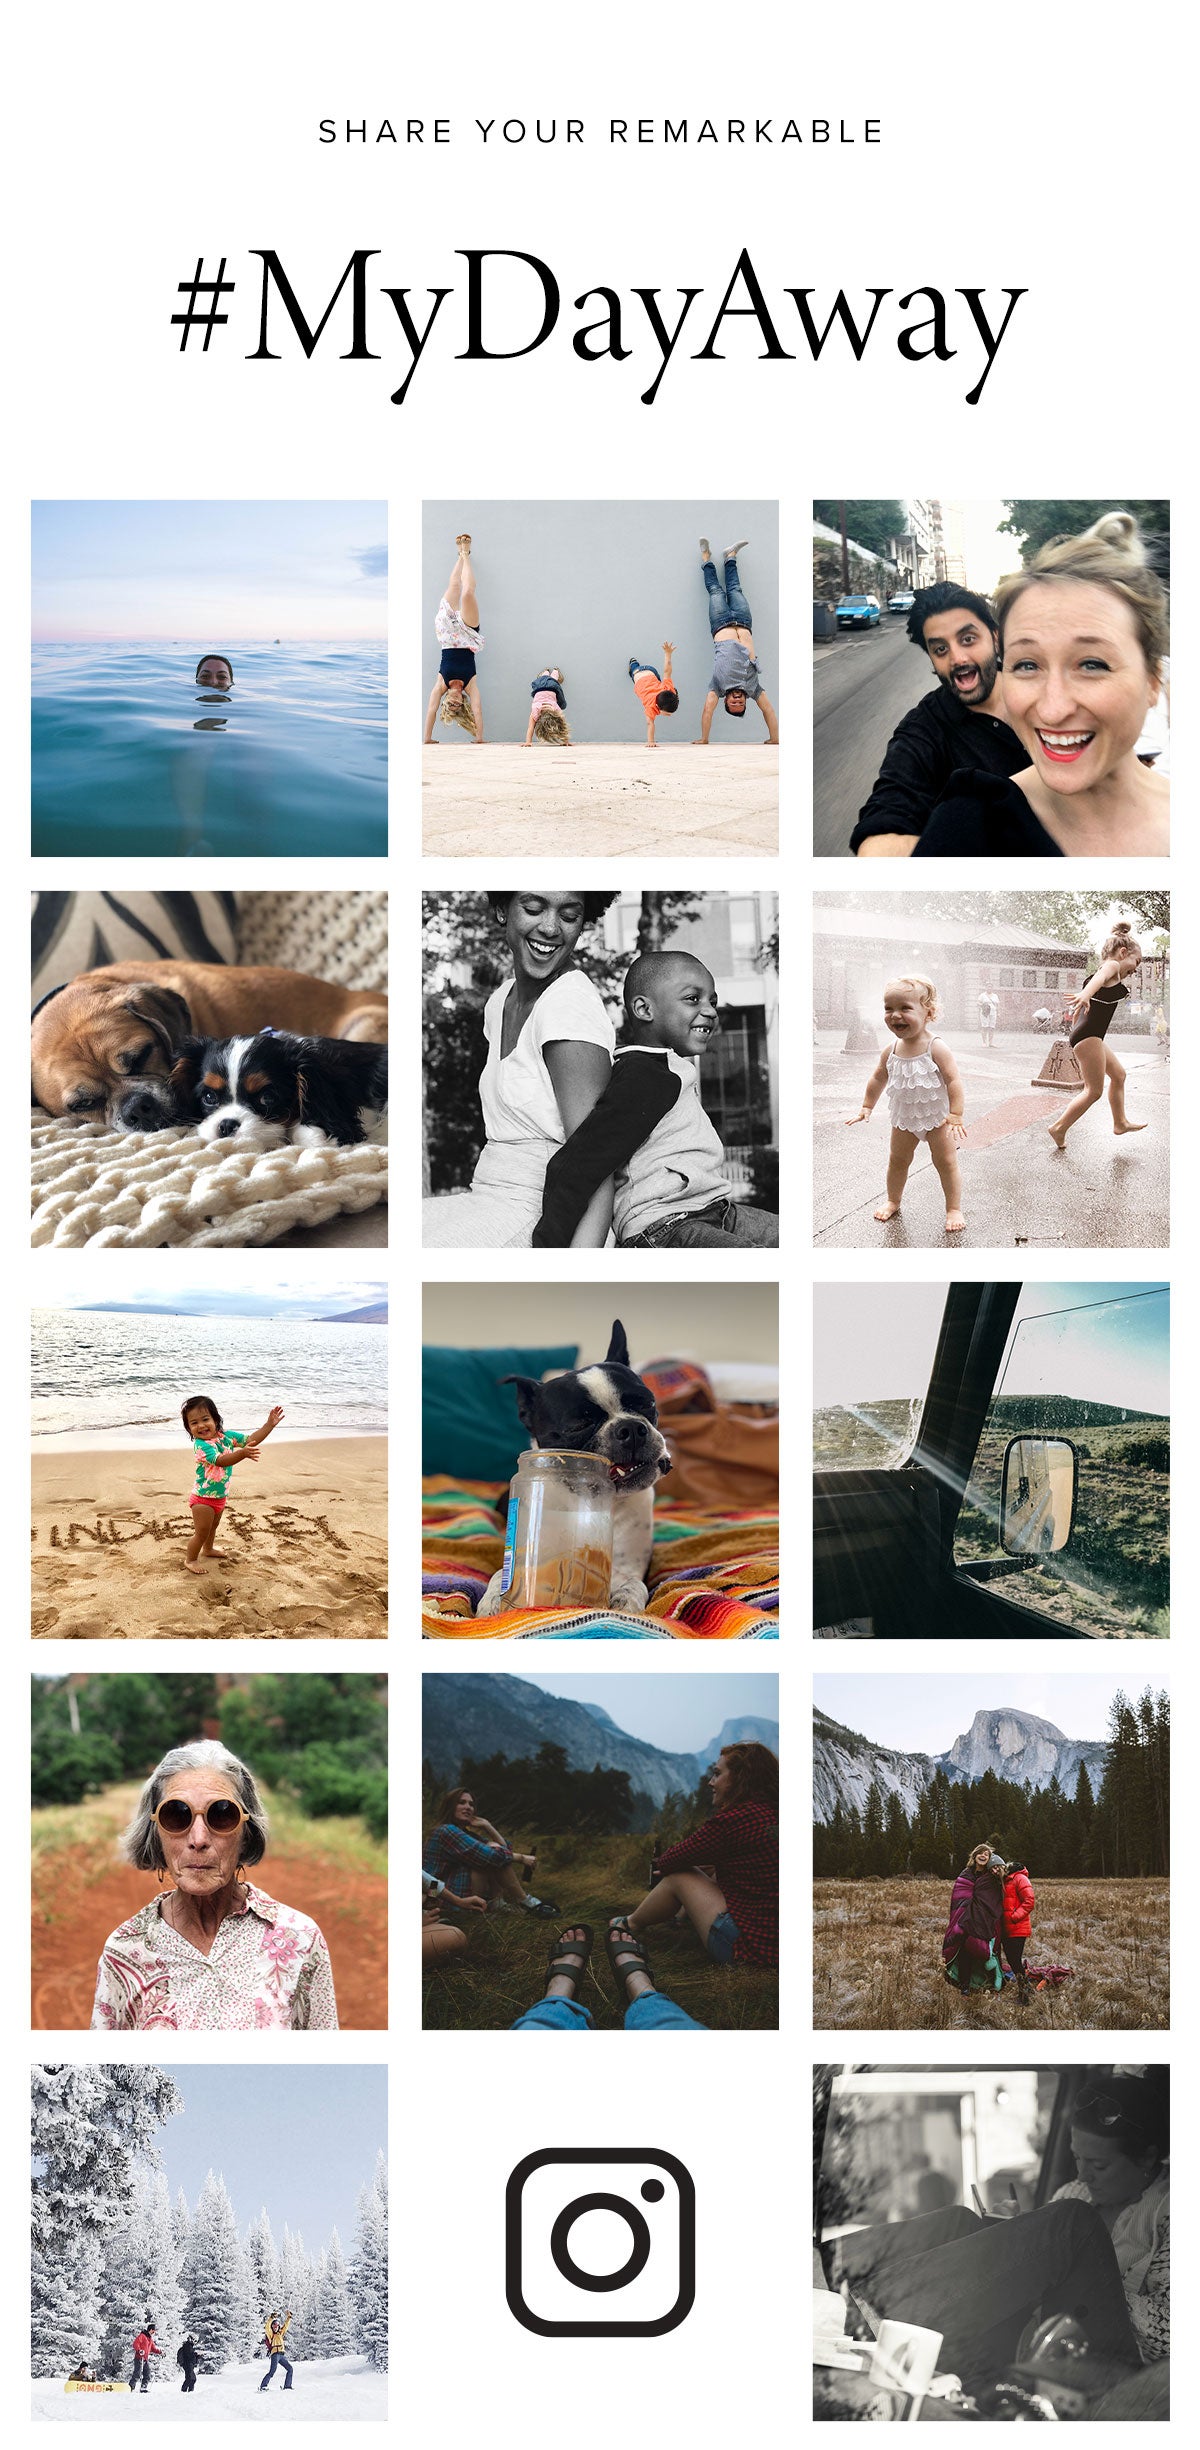 Share your day away with #mydayaway on Instagram